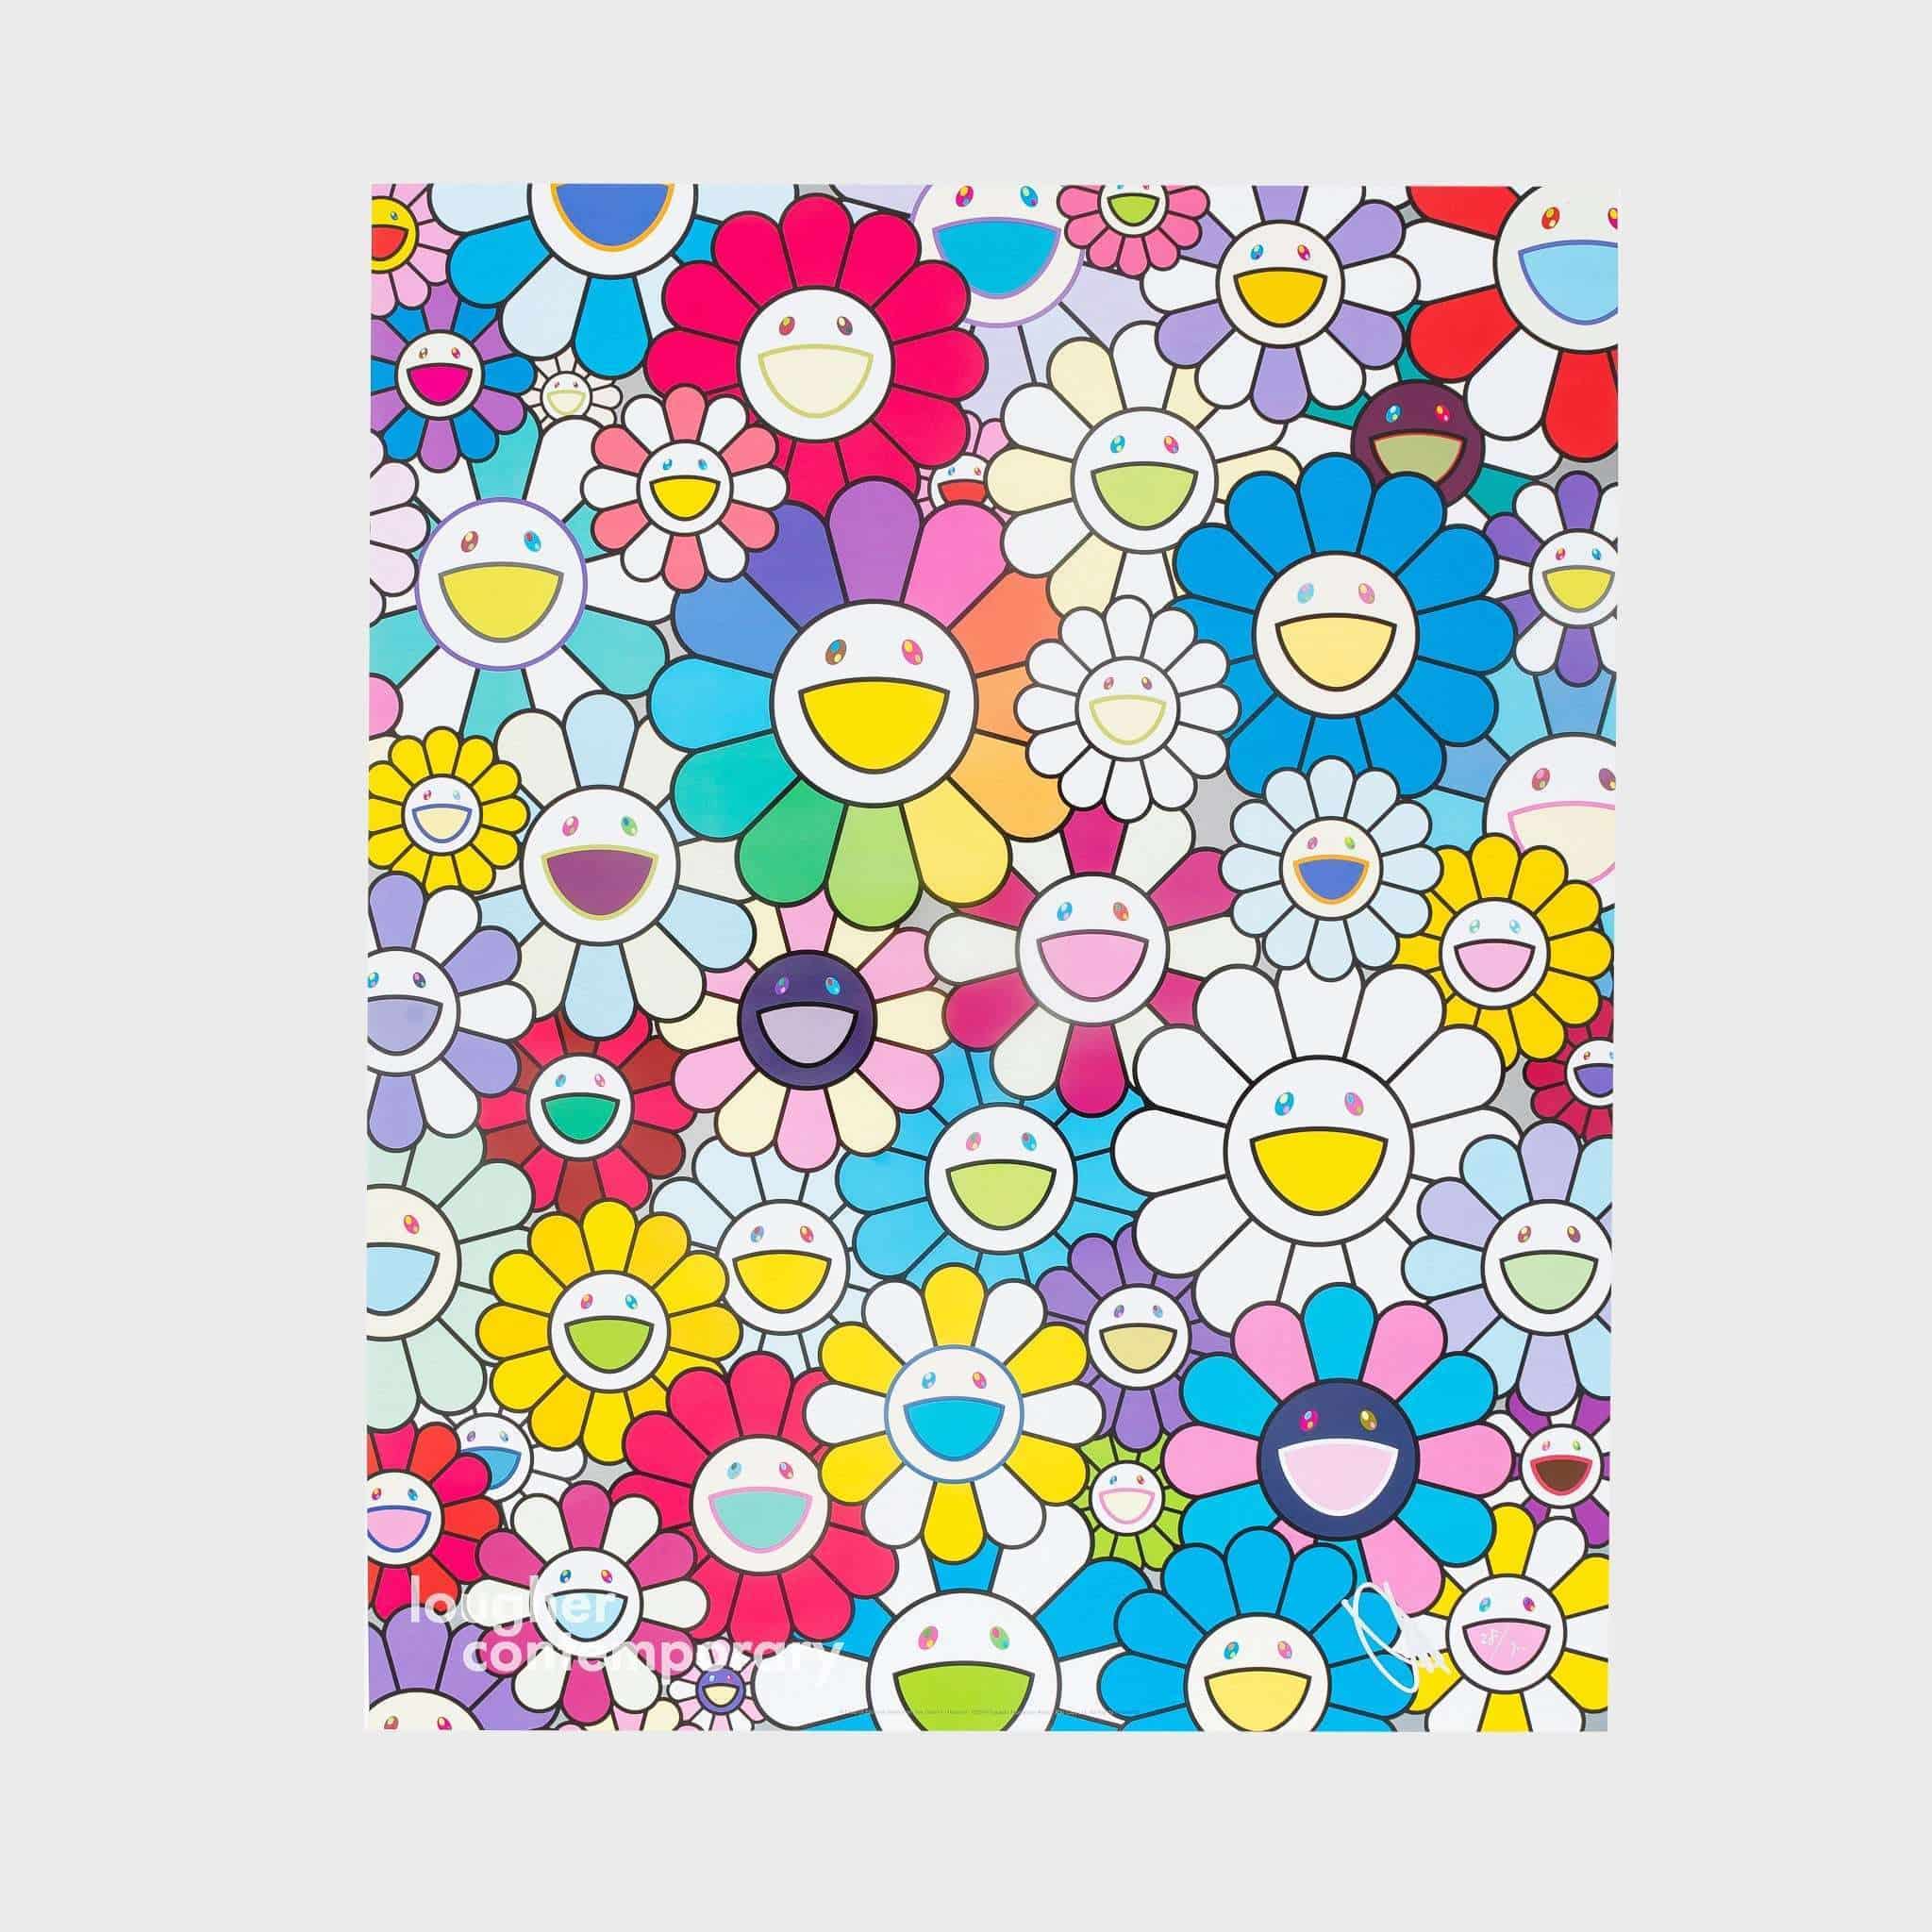 Takashi Murakami, A Field of Flowers Seen from the Stairs to Heaven, 2019 For Sale - Lougher Contemporary